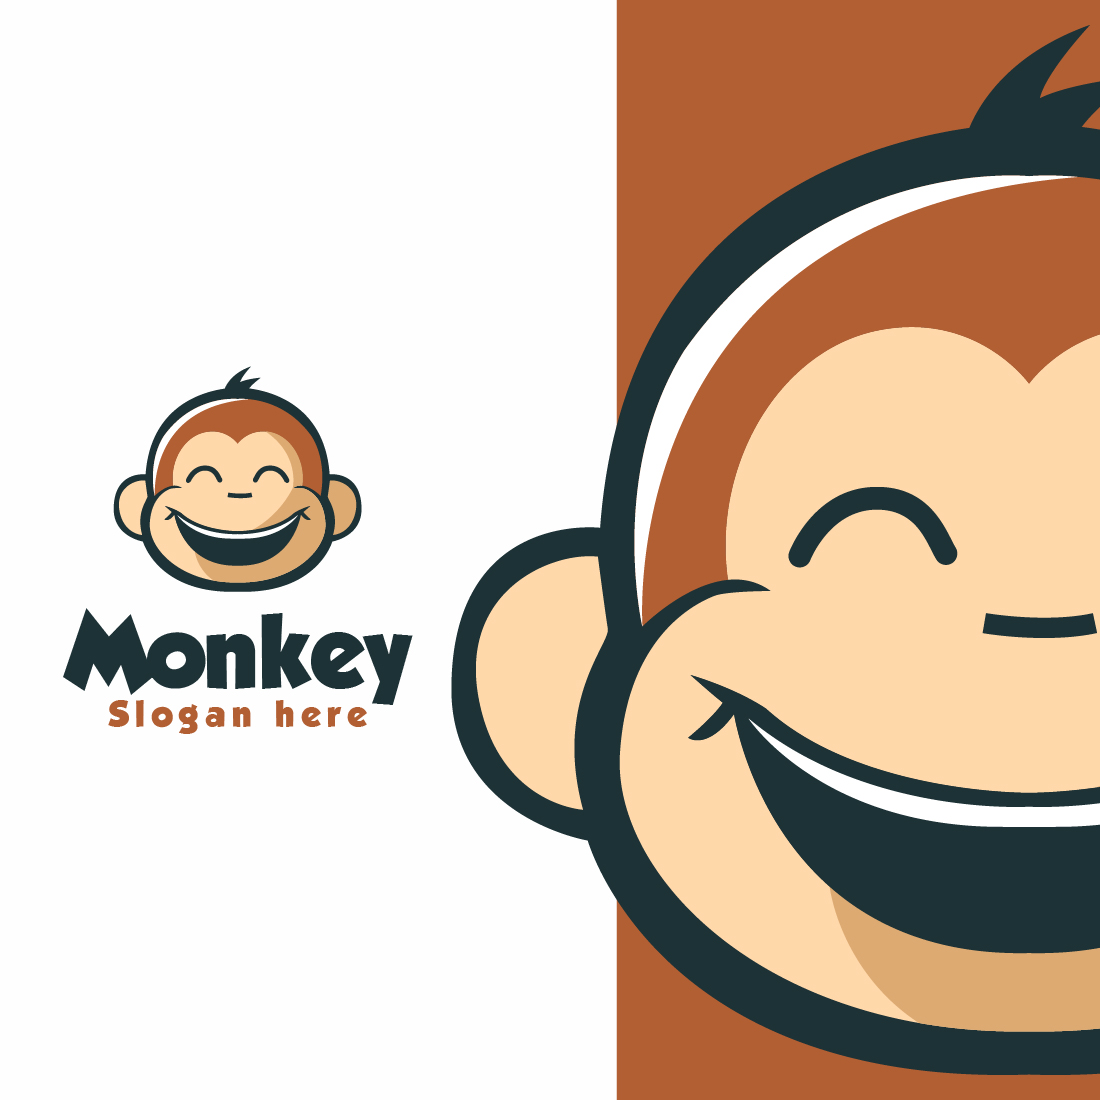 Cute Monkey Smile Face Mascot logo Template preview image.